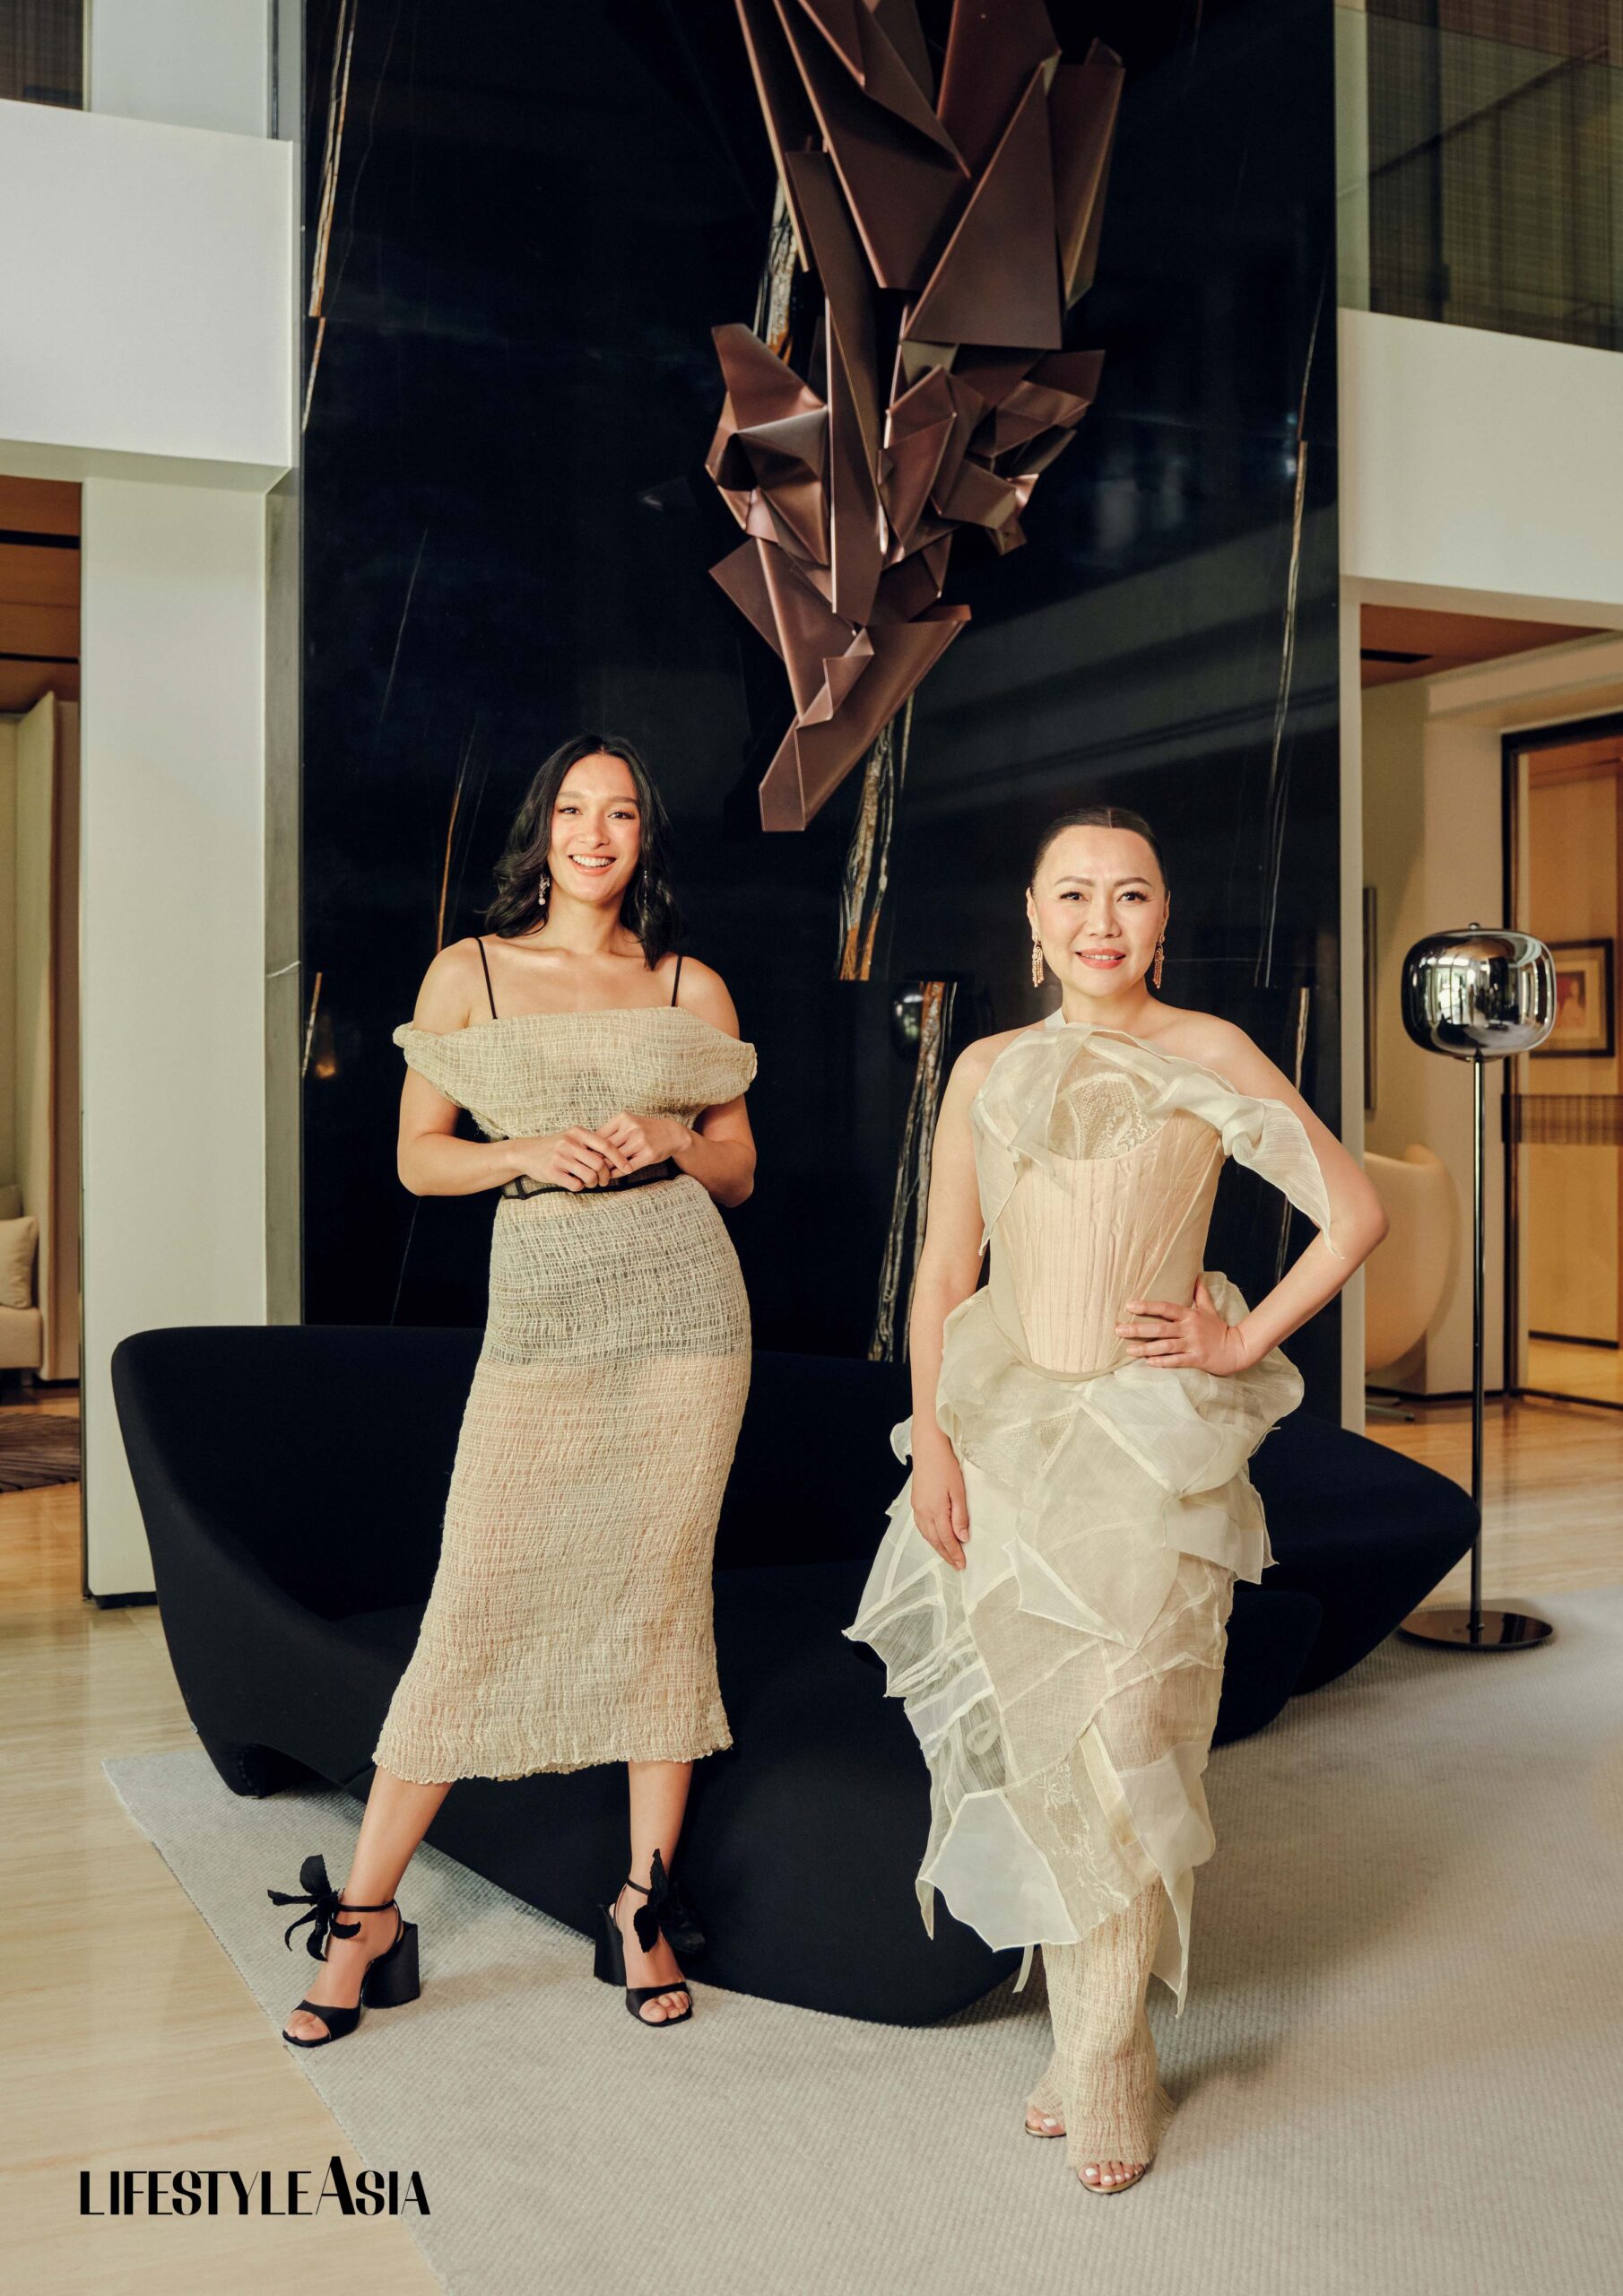 ON BEA: Smocked piña off-shoulder dress with a black corset belt, RAJO LAUREL; Earrings, JUL B DIZON JEWELLERY; Black sandals, NUMERO VENTUNO; ON BENG: Love letter barong tunic and blouse, smocked piña skirt and corset, RAJO LAUREL; Coral earrings, JUL B DIZON JEWELLERY